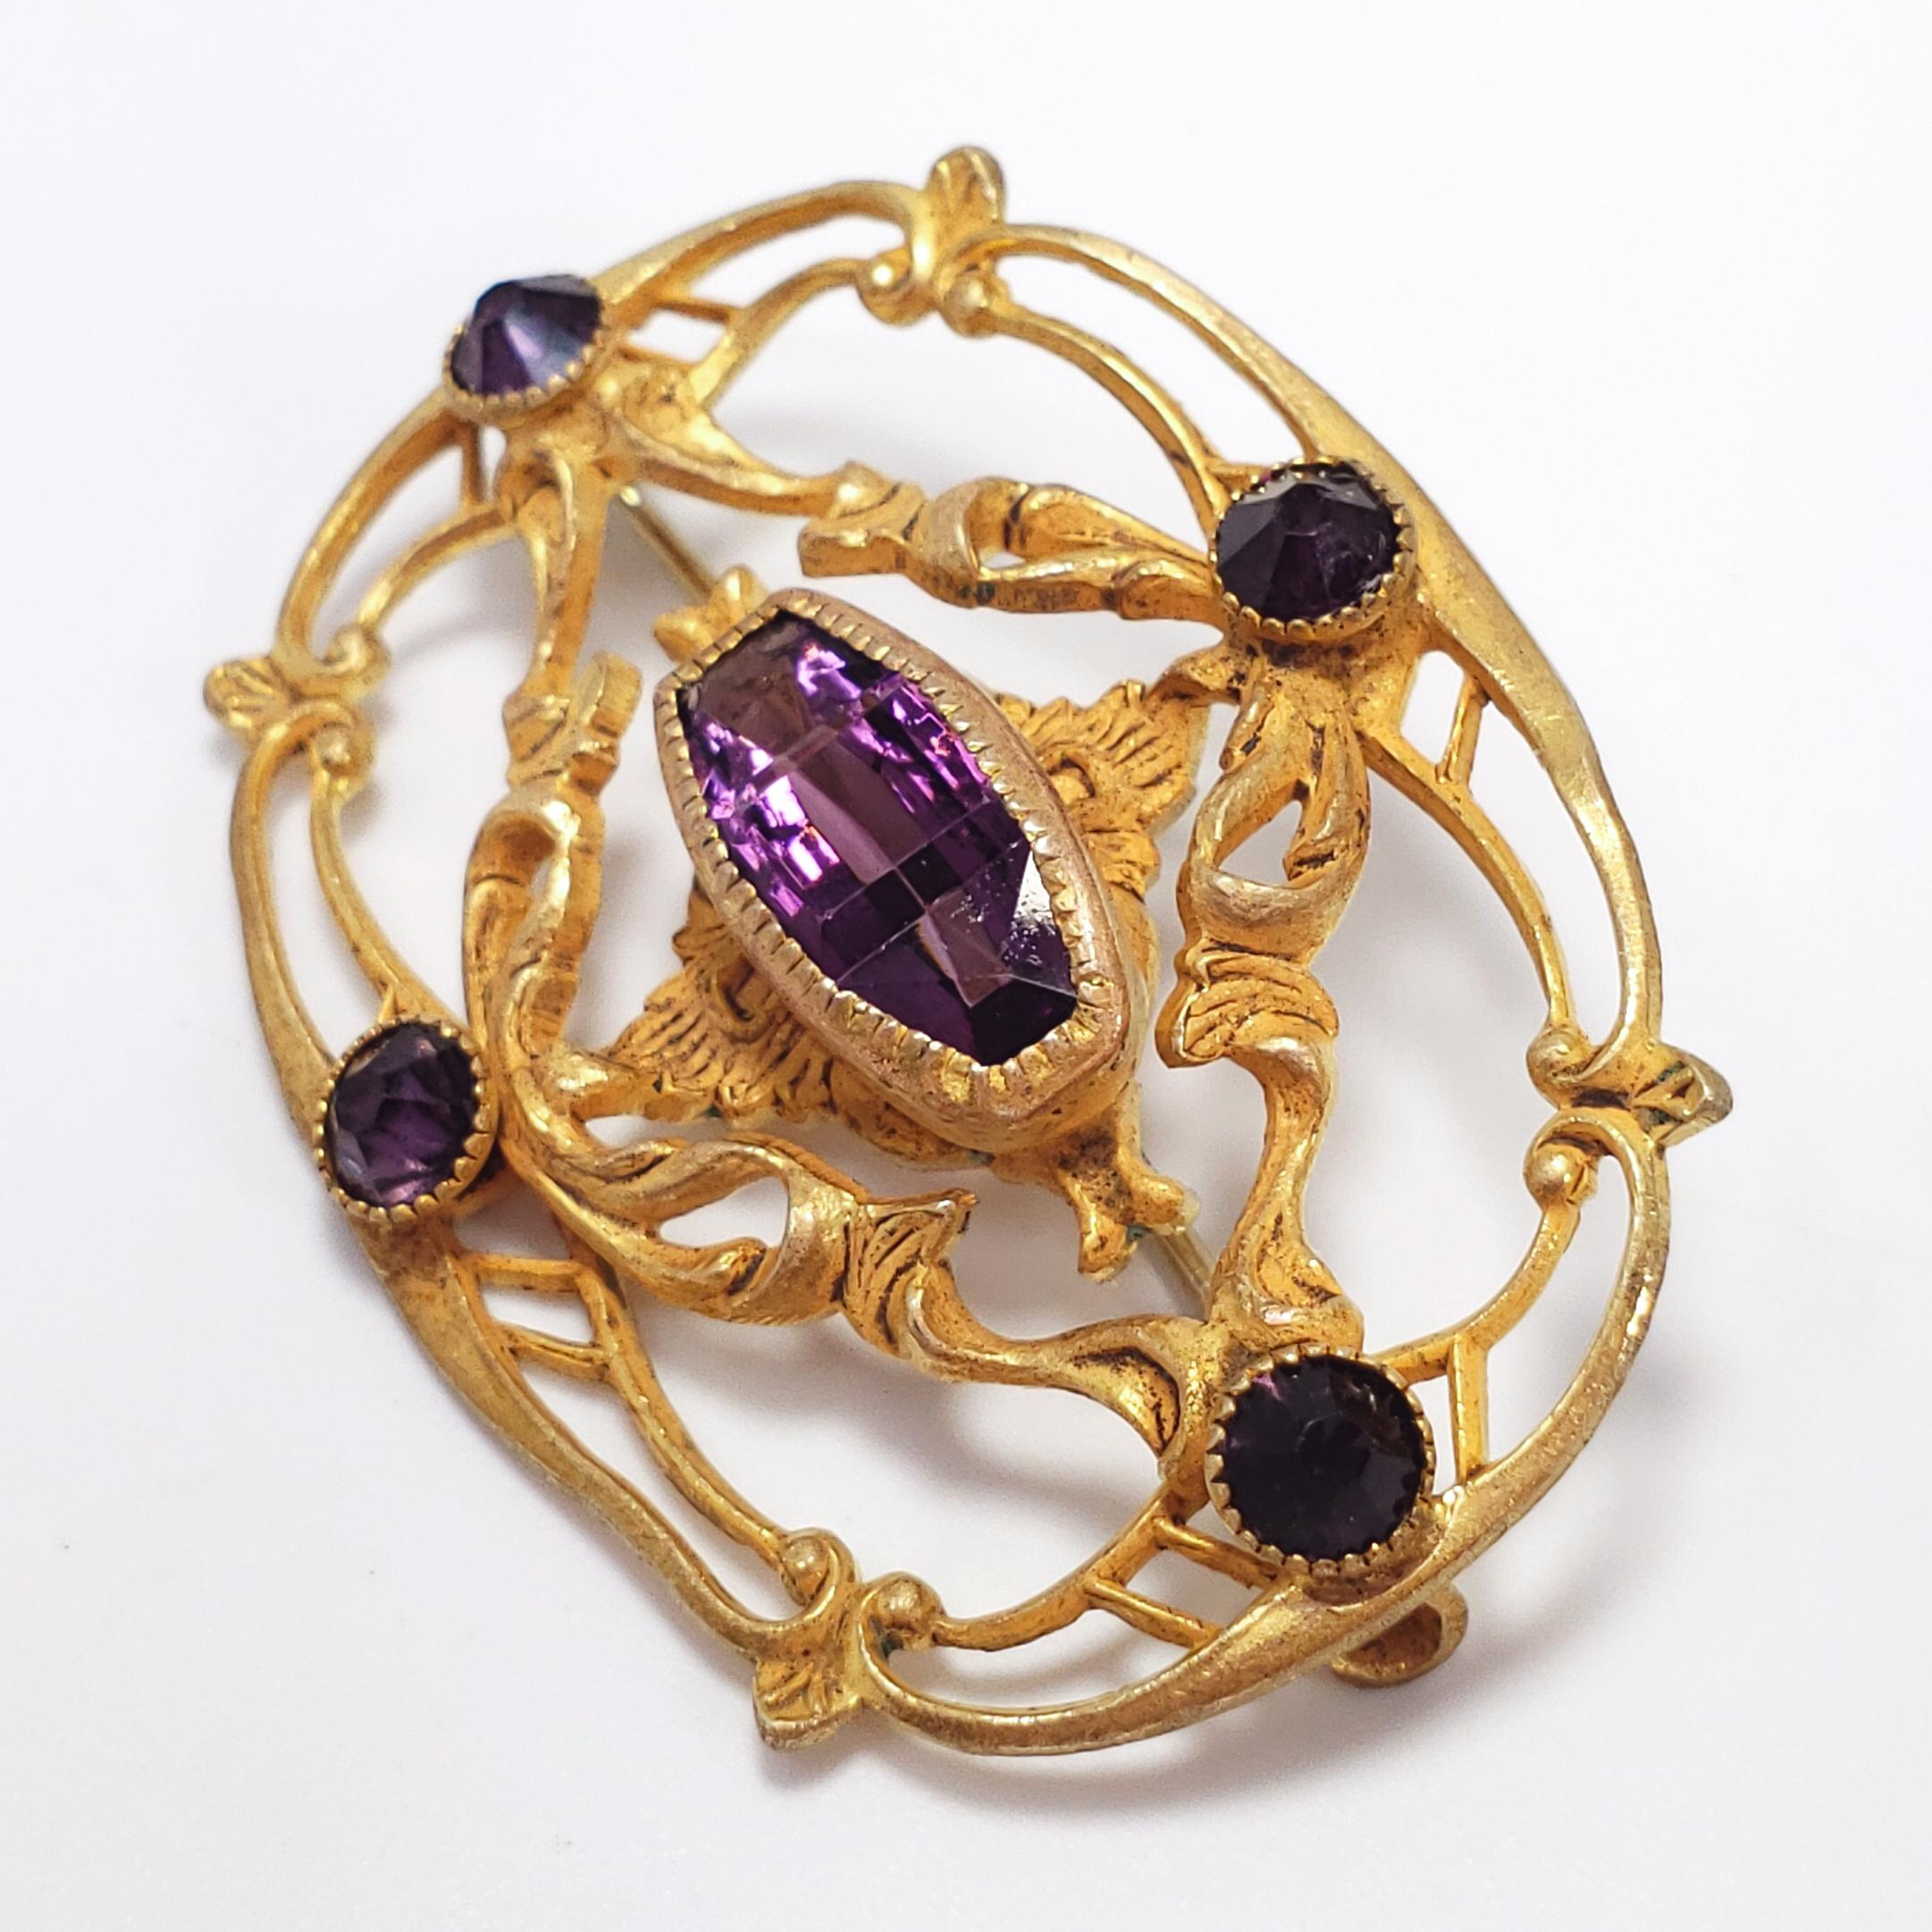 A centerpiece open-back amethyst in a unique cut, set in an ornate vermeil frame, typical of the time period. Accented by 4 smaller chaton crystals on all four sides. Fastened with antique hook clasp.

Hallmarks: A maltese cross motif on the pin C